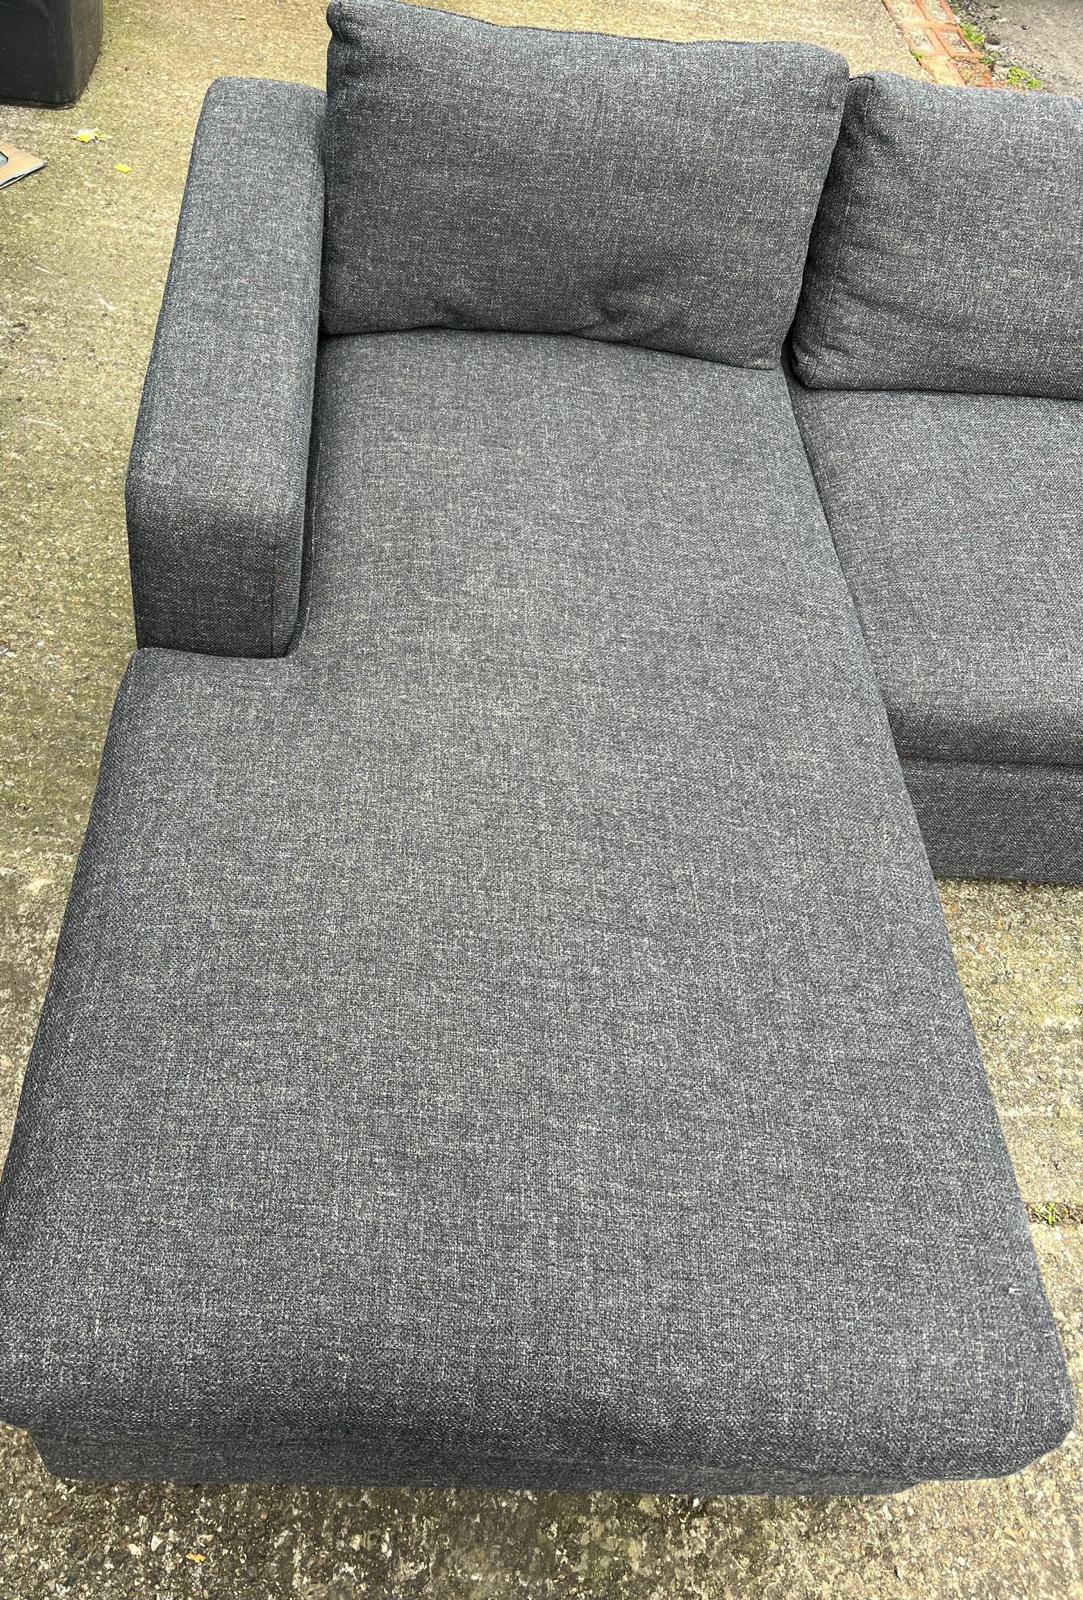 A corner sofa upholstered in a grey highland tweed by sofa.com - Image 2 of 6